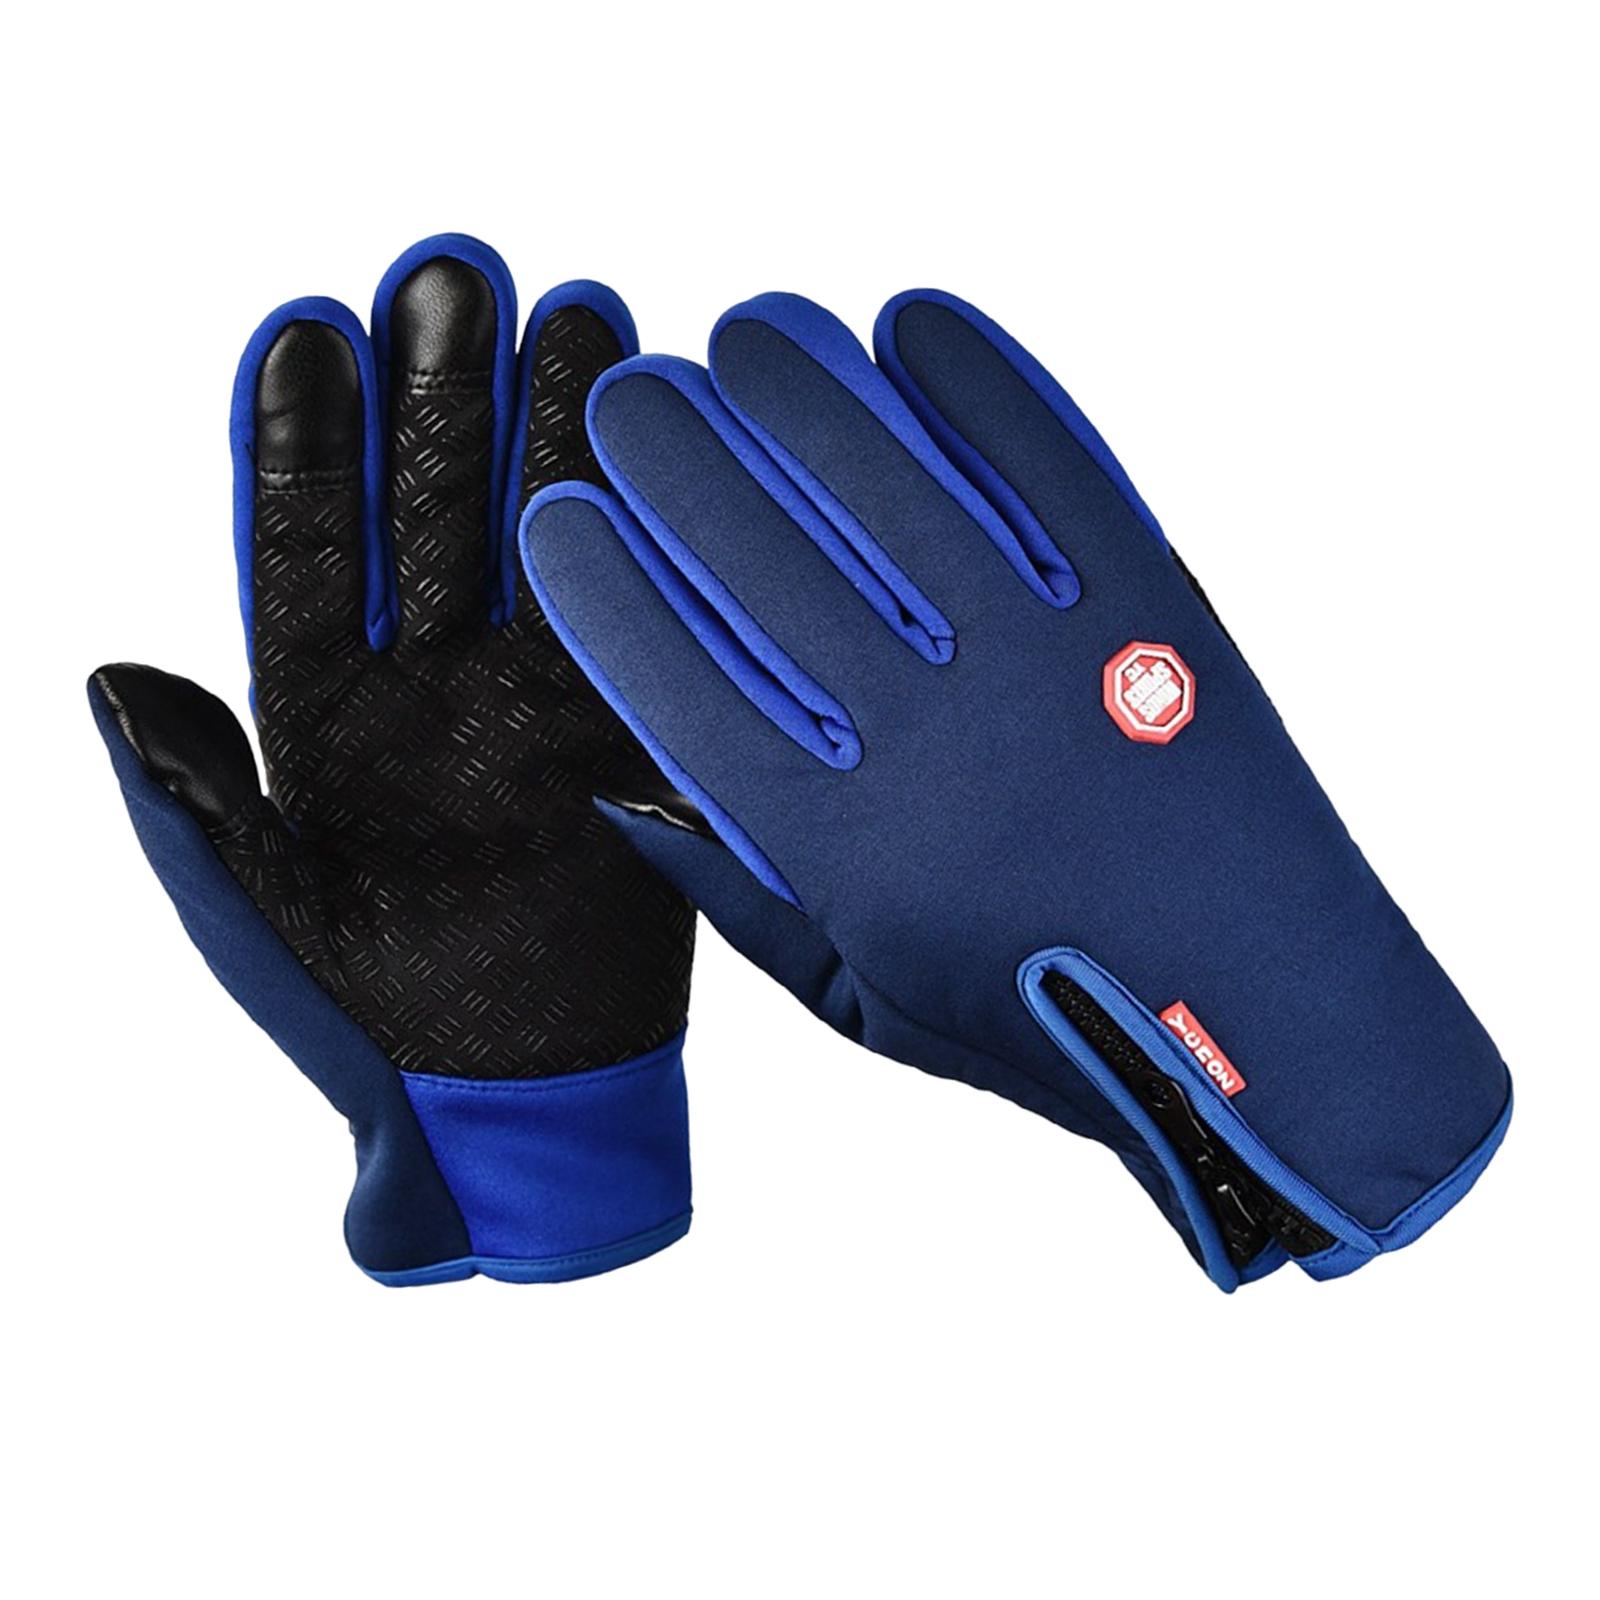 Winter Gloves Nonslip Thermal Gloves for Outdoor Running Sports Motorcycle Blue L